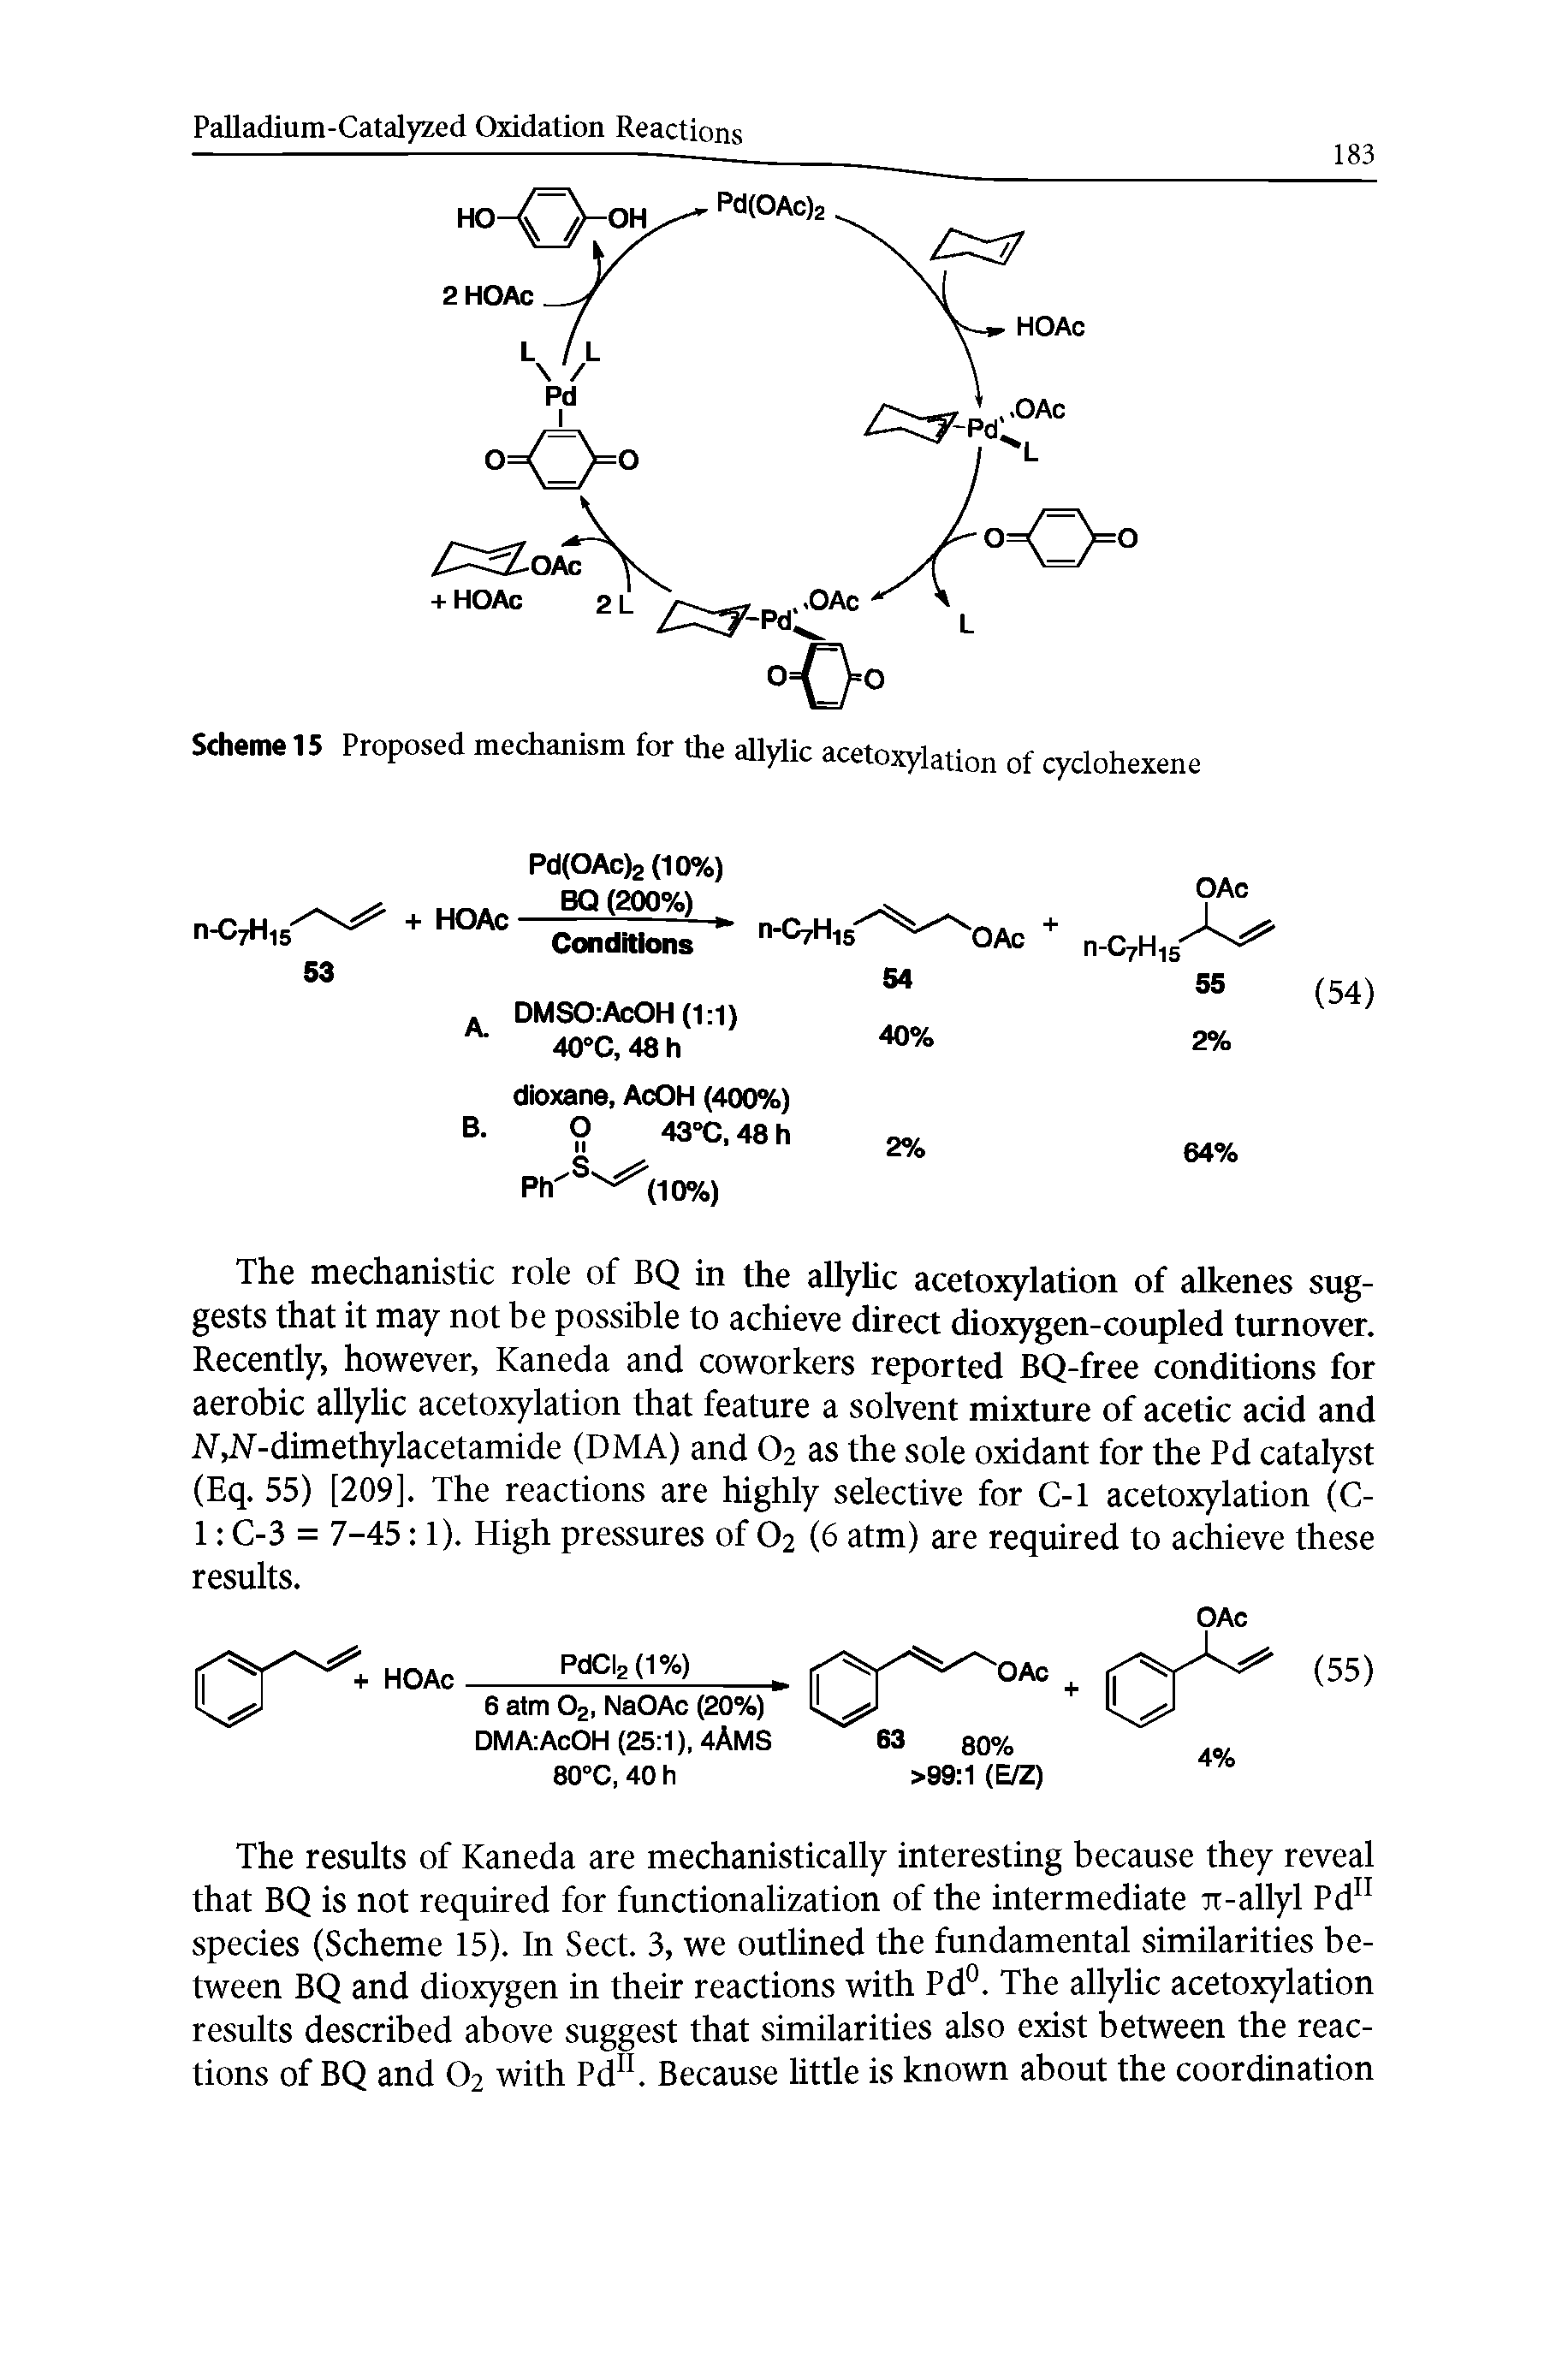 Scheme 15 Proposed mechanism for the allylic acetoxylation of cyclohexene...